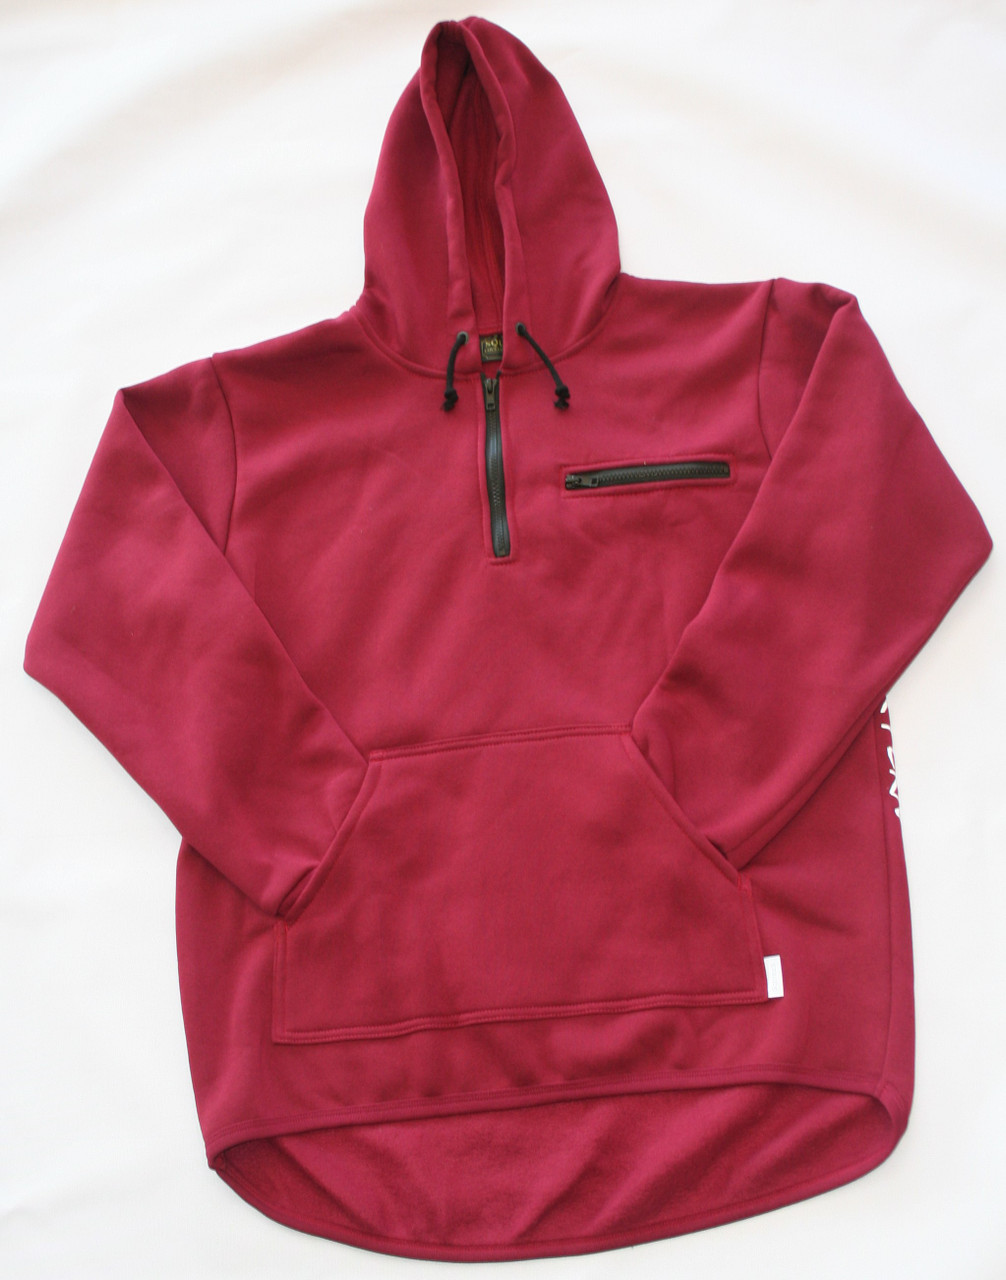 Delux Hoodie - Squires Manufacturing Co Ltd